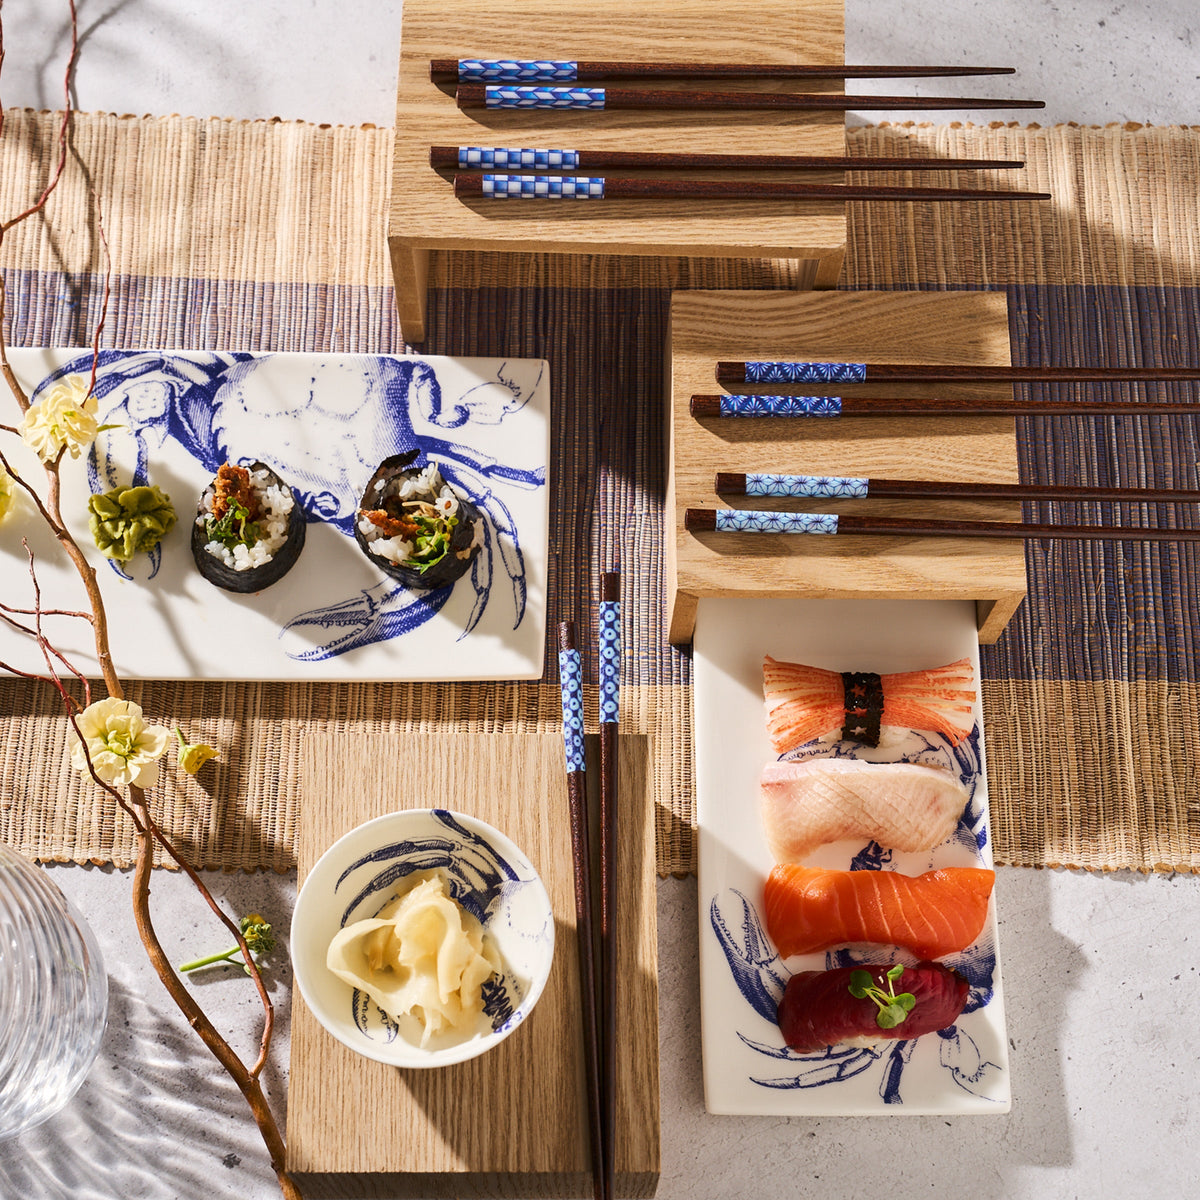 A neatly arranged sushi set on a wooden serving board includes nigiri, maki rolls, pickled ginger, and chopsticks with blue and white patterns, accompanied by Crab Dipping Dishes, Set of 4 from Caskata for serving sauces.